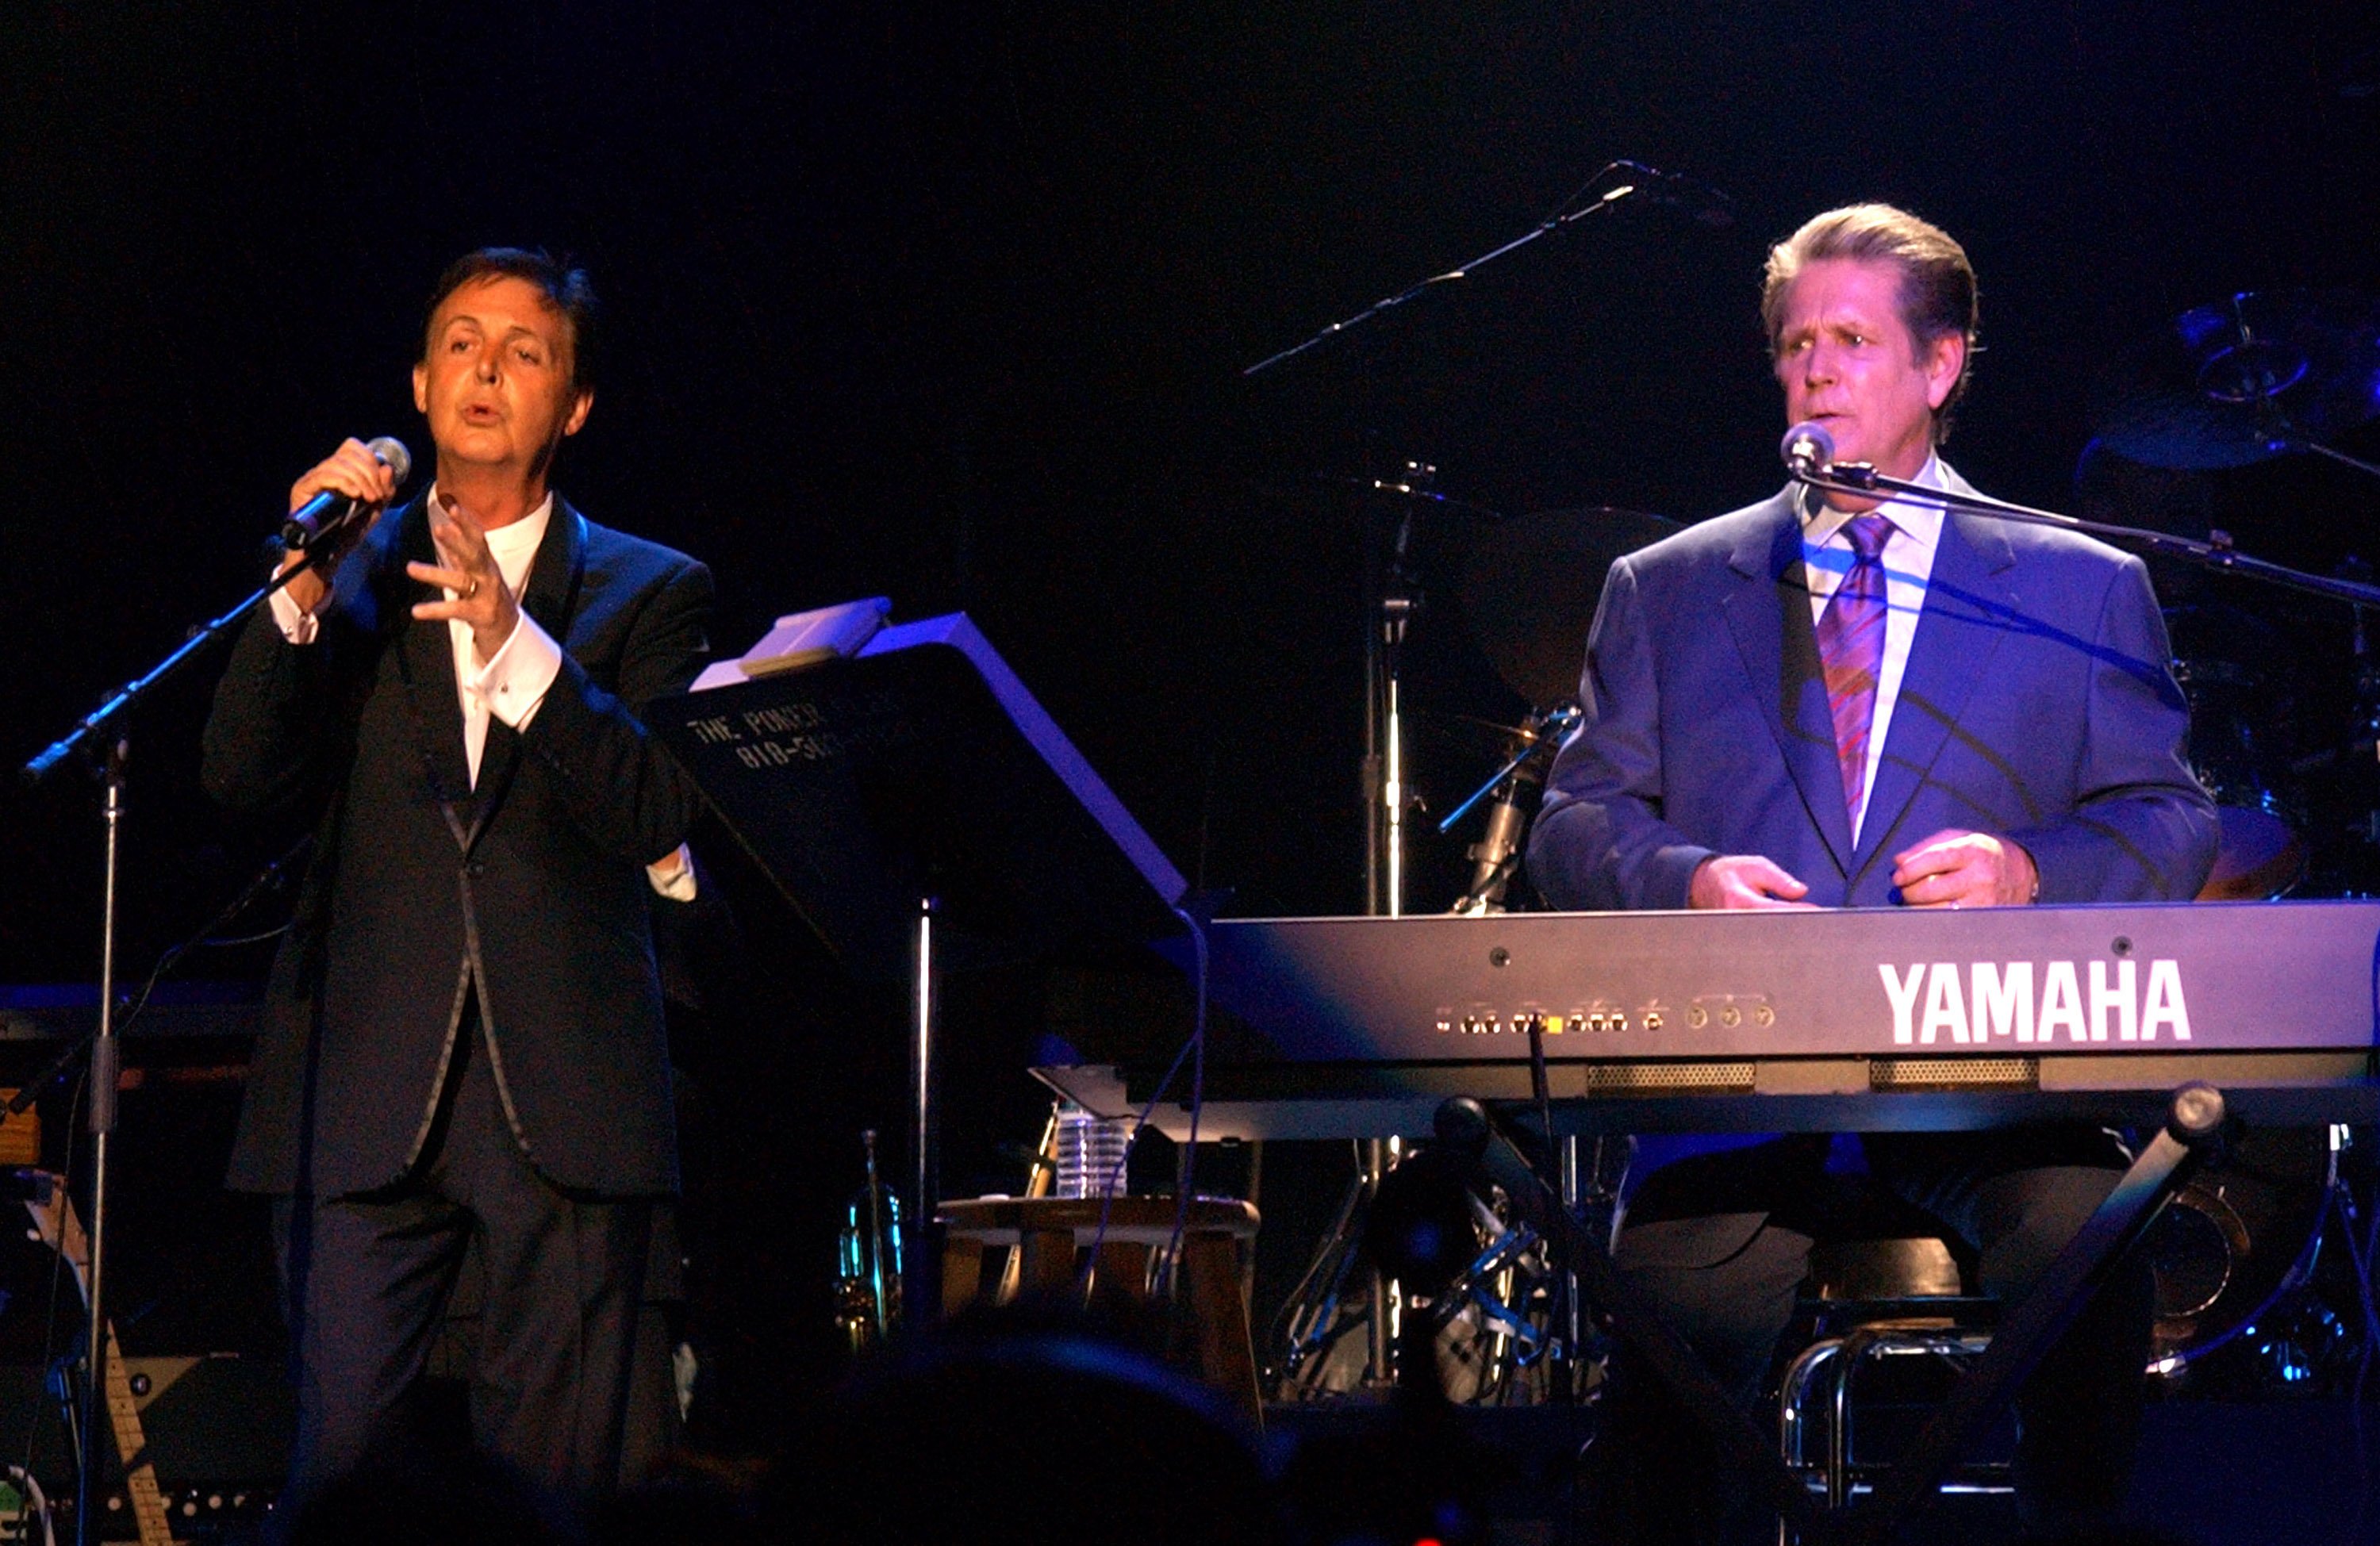 Sir Paul McCartney and Brian Wilson perform together